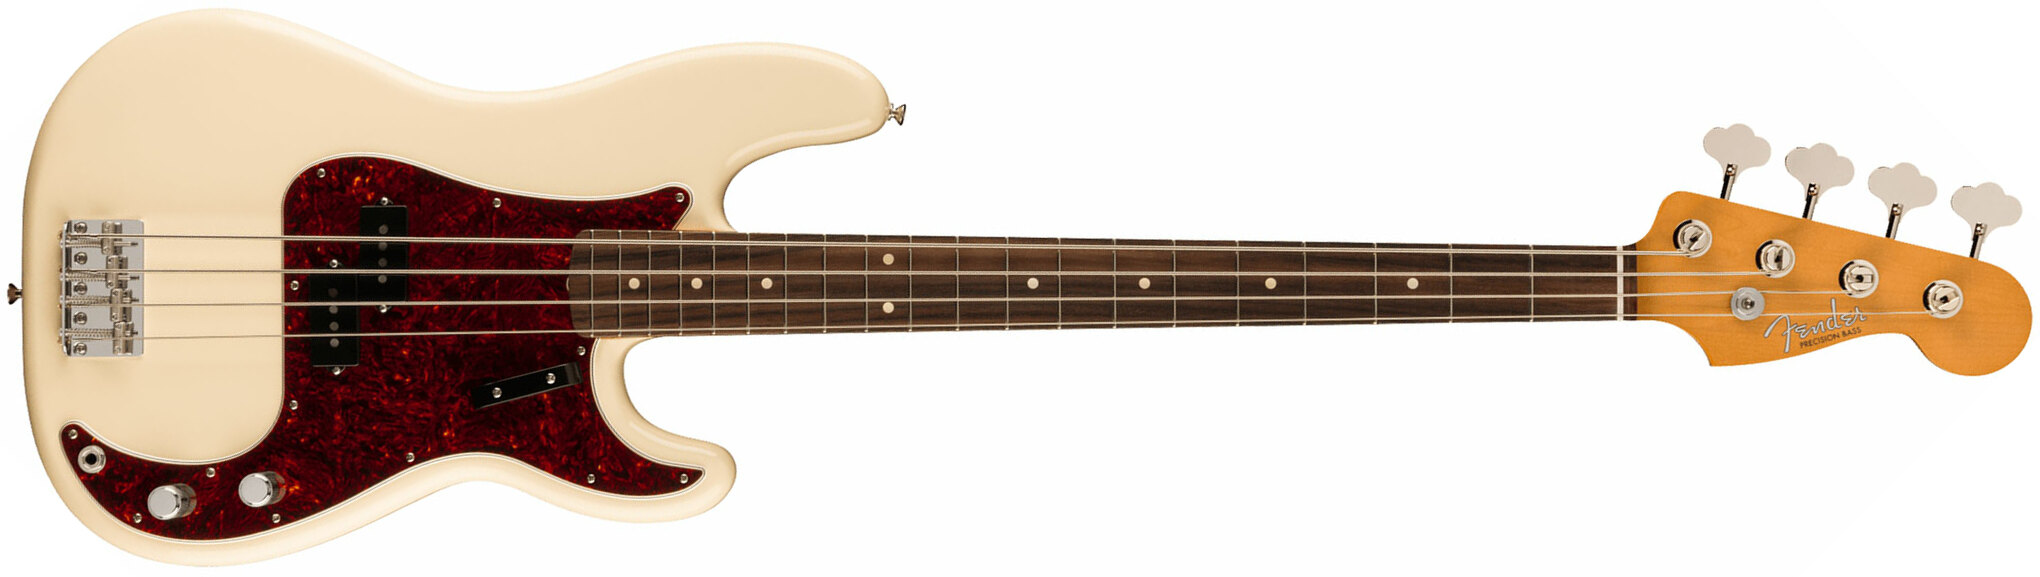 Fender Precision Bass 60s Vintera Ii Mex Rw - Olympic White - Solid body electric bass - Main picture